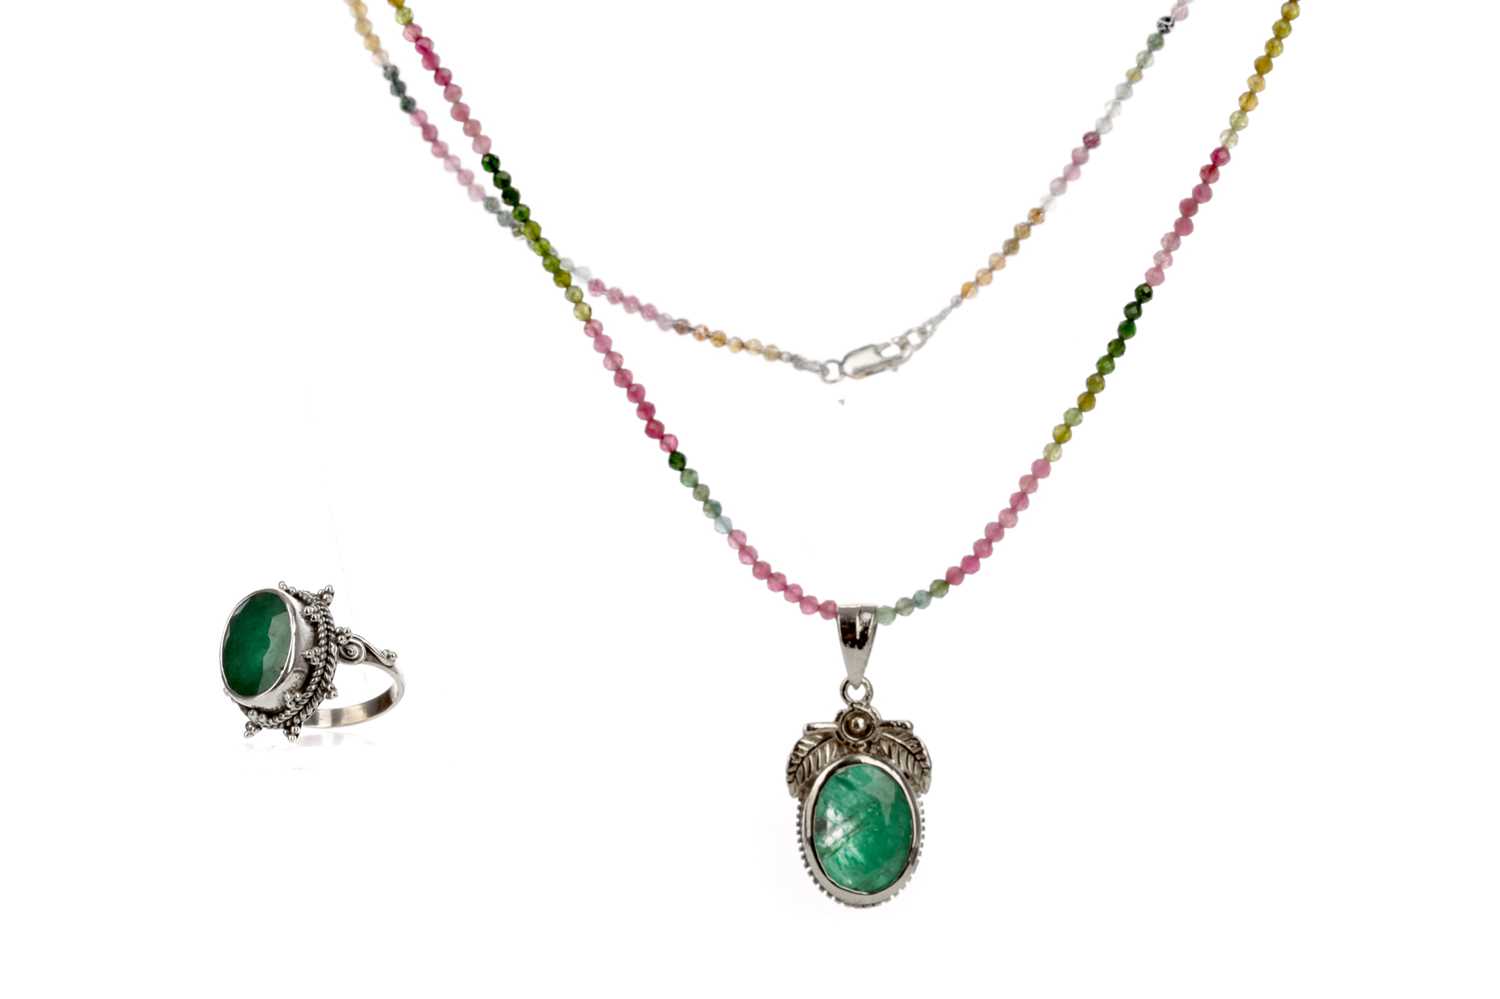 Lot 427 - A TOURMALINE BEAD NECKLACE, EMERALD RING AND PENDANT